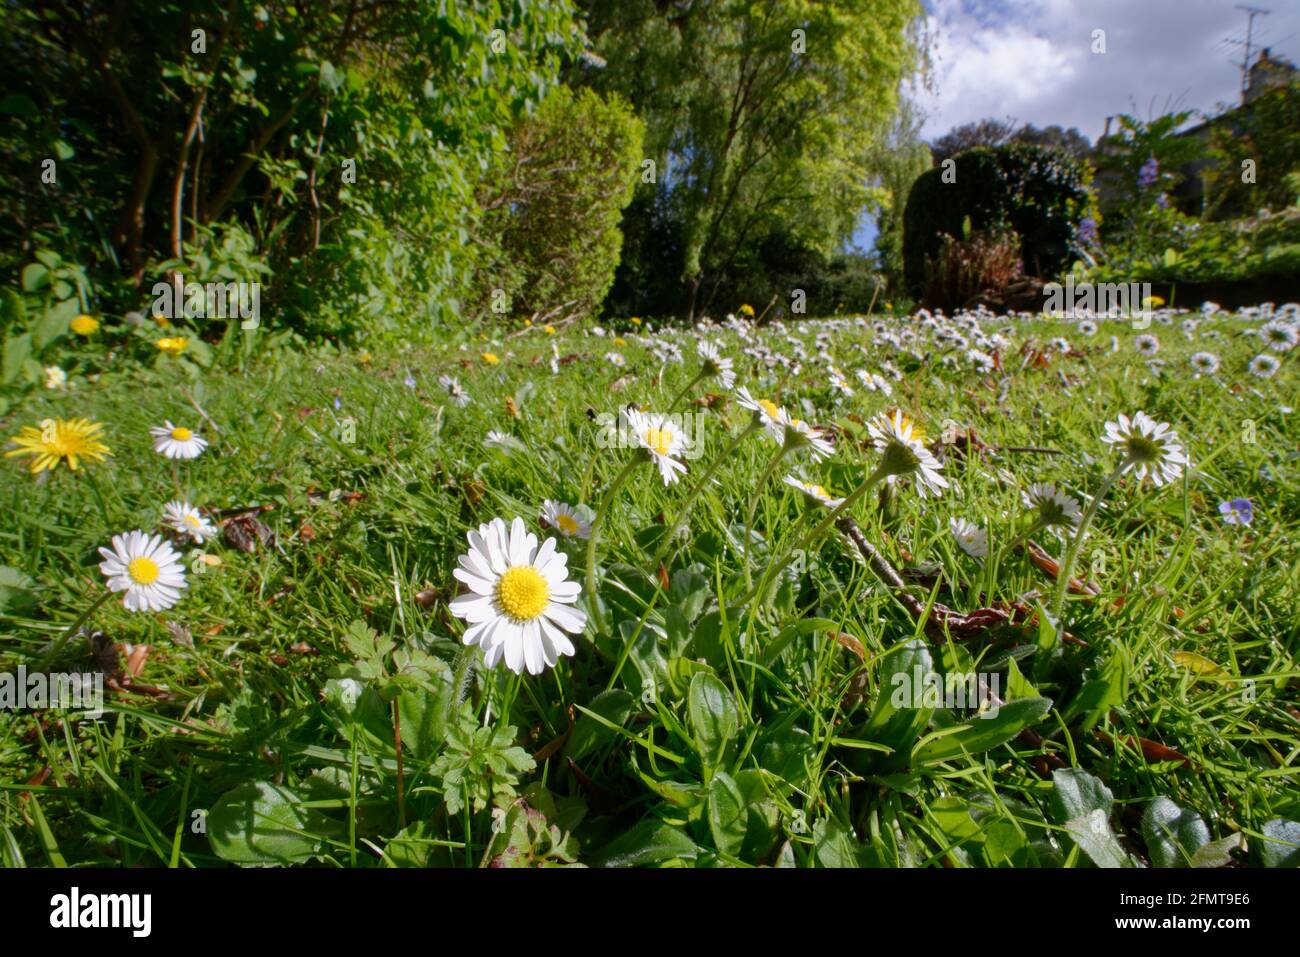 Daisies and Dandelions flowering in a lawn left unmown to allow wild flowers to bloom and insects to feed, Wiltshire garden, UK, May. Stock Photo